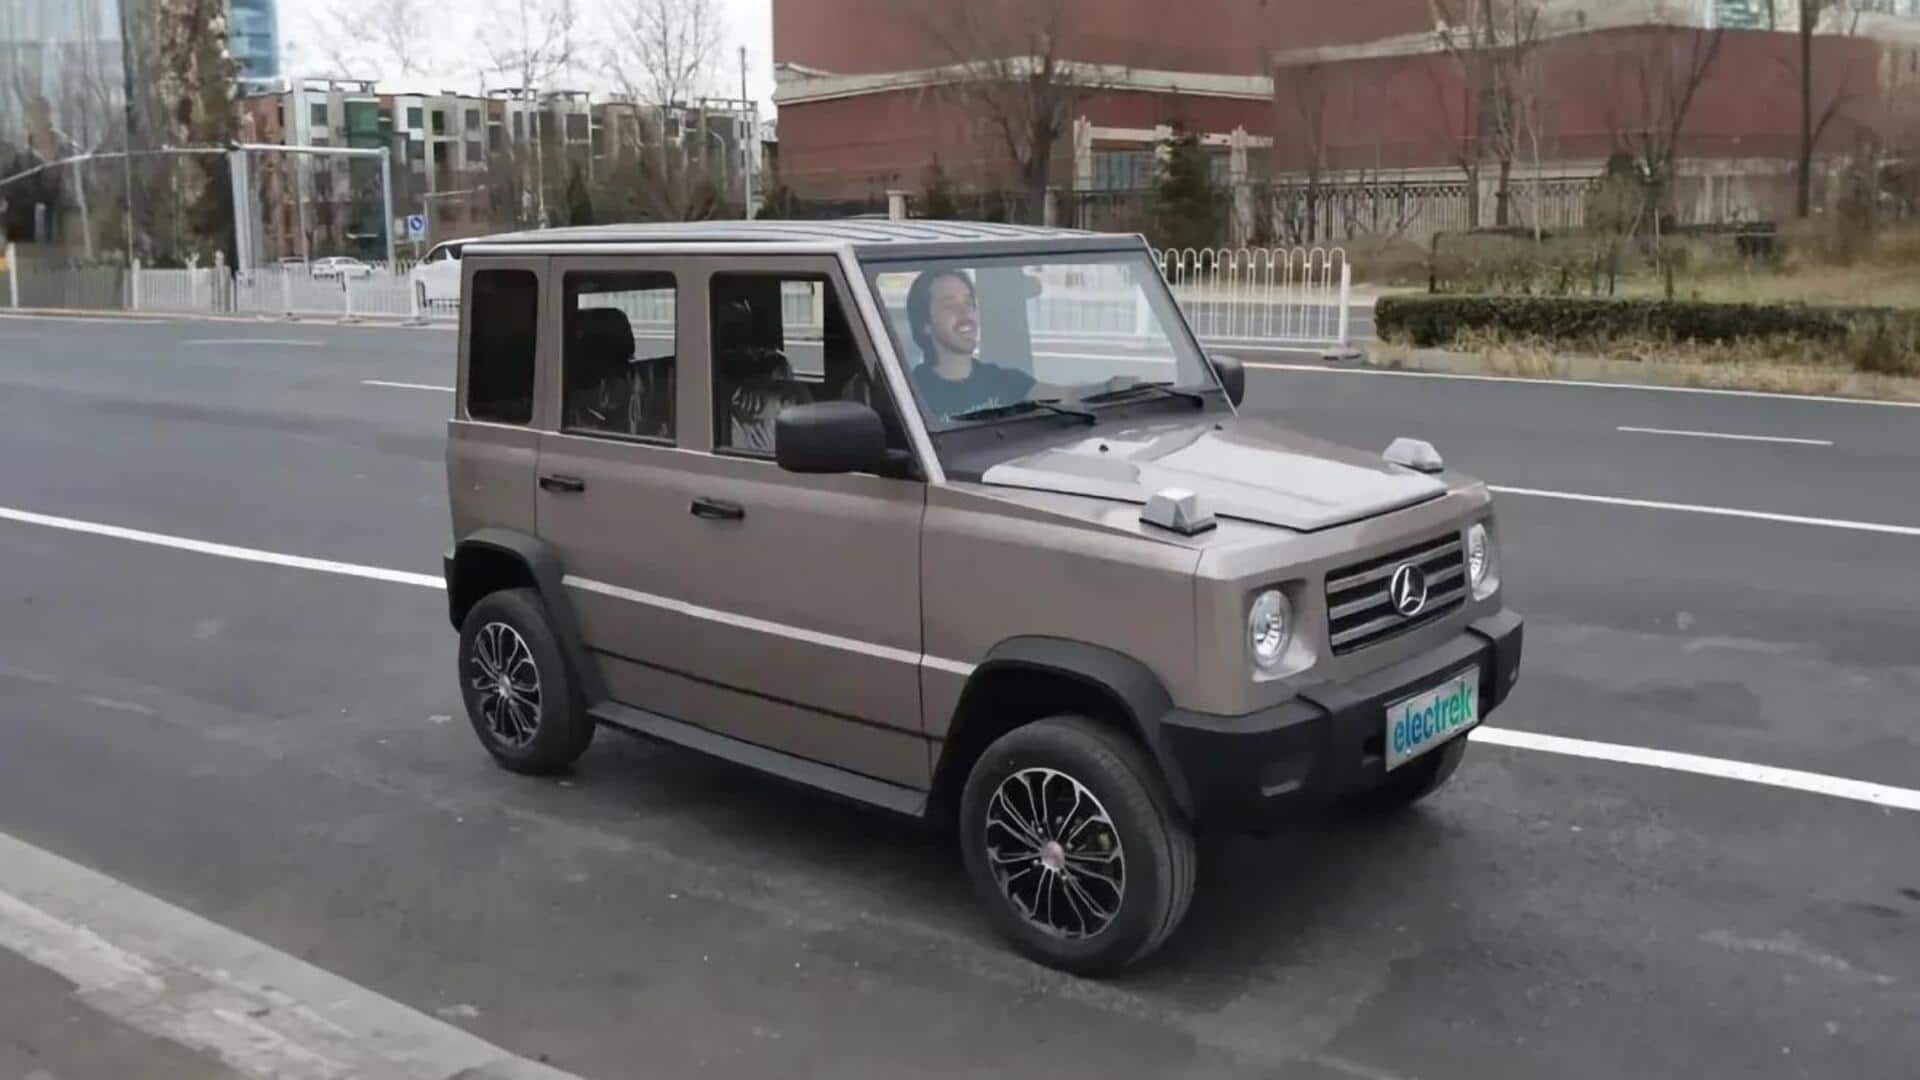 Meet China's G-Class clone, a compact EV with larger-than-life attitude